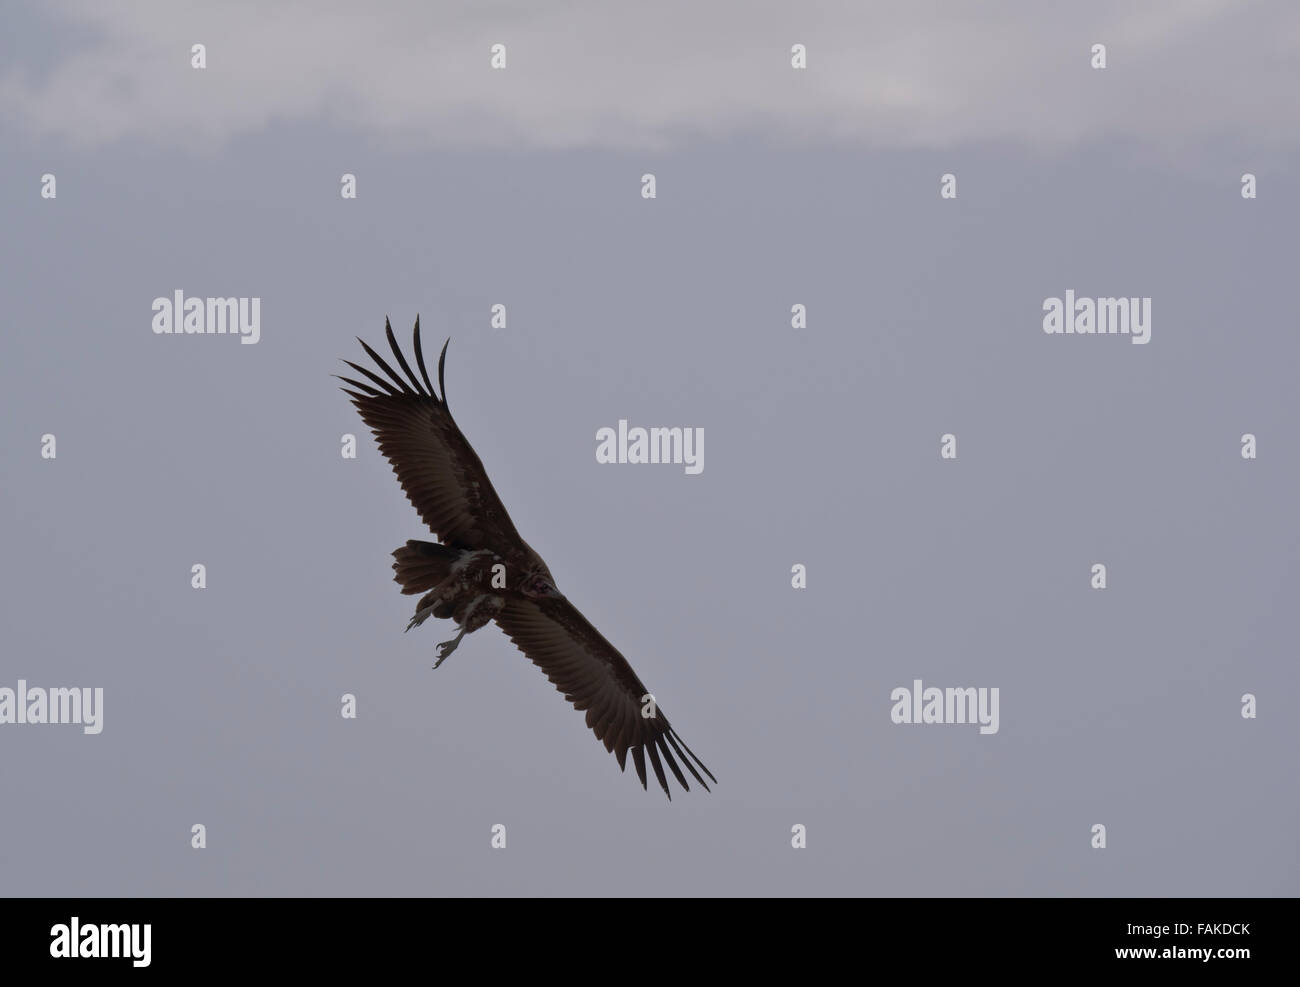 A Hood Vulture coming into land Stock Photo